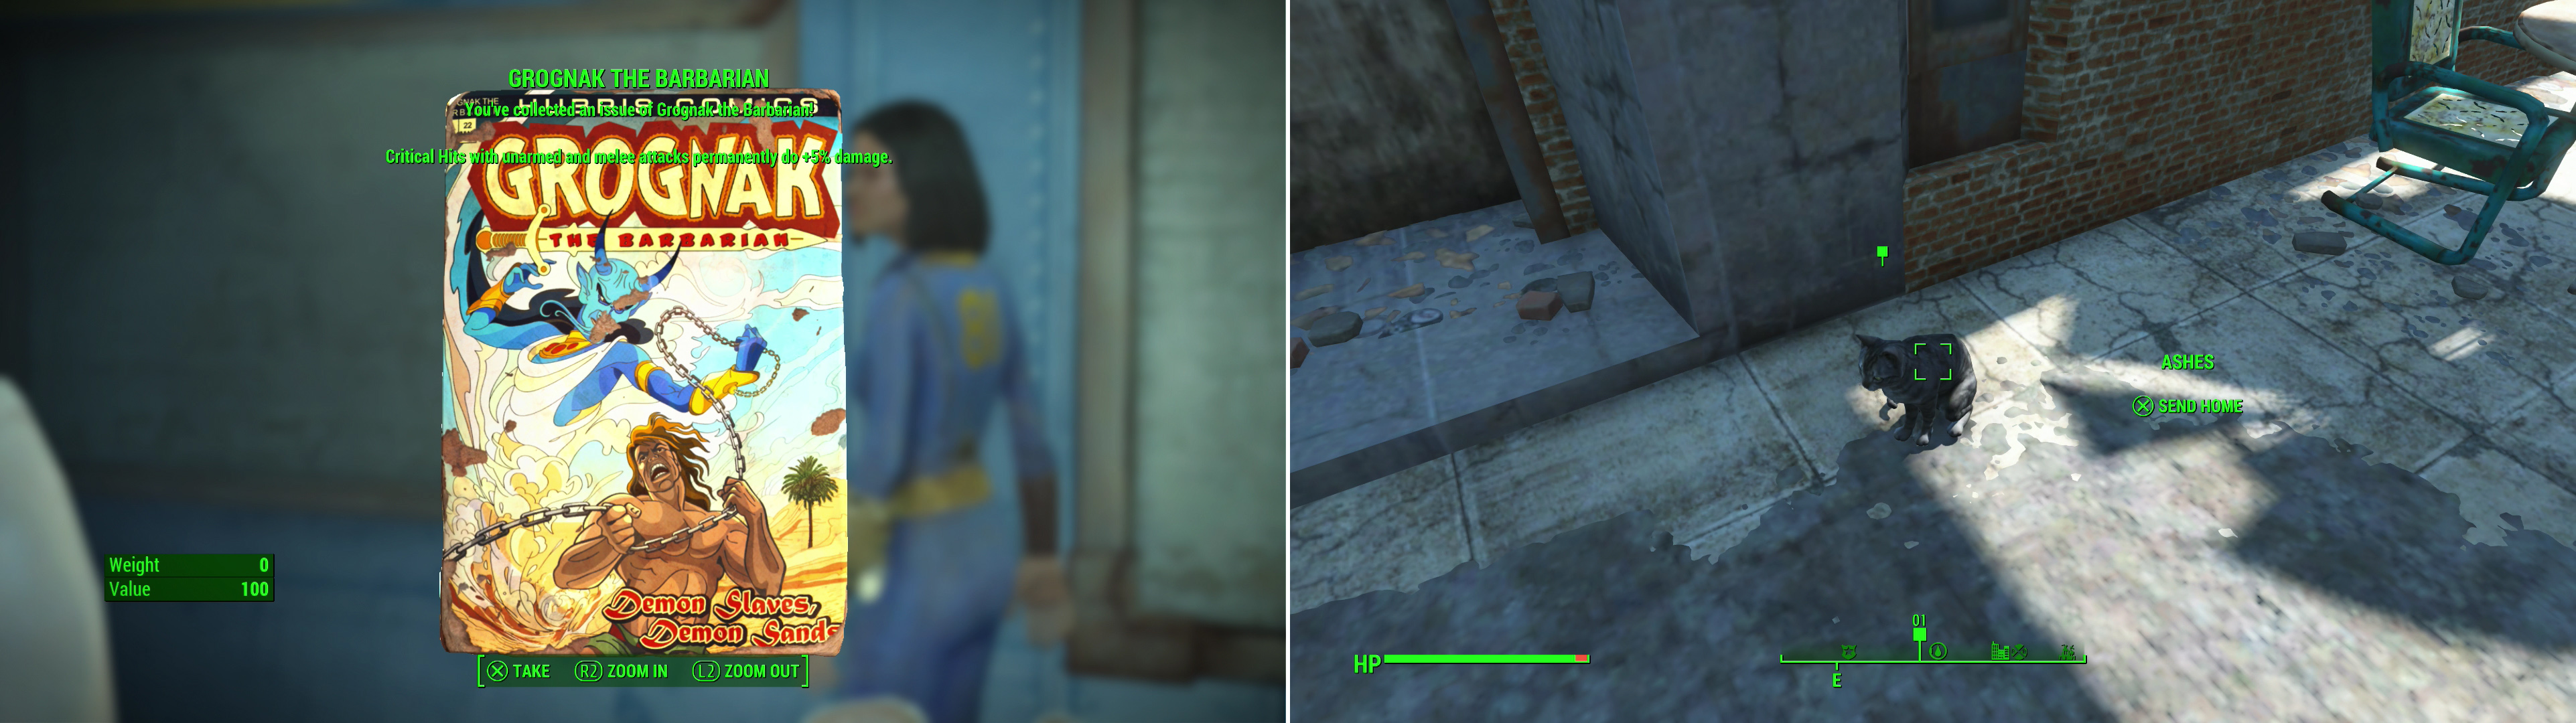 Tell the kids a story at the behest of their teacher, Katy, and you’ll get a Grognak the Barbarian comic as a reward (left). Head outside Vault 81 to find the missing kitty, Ashes (right).